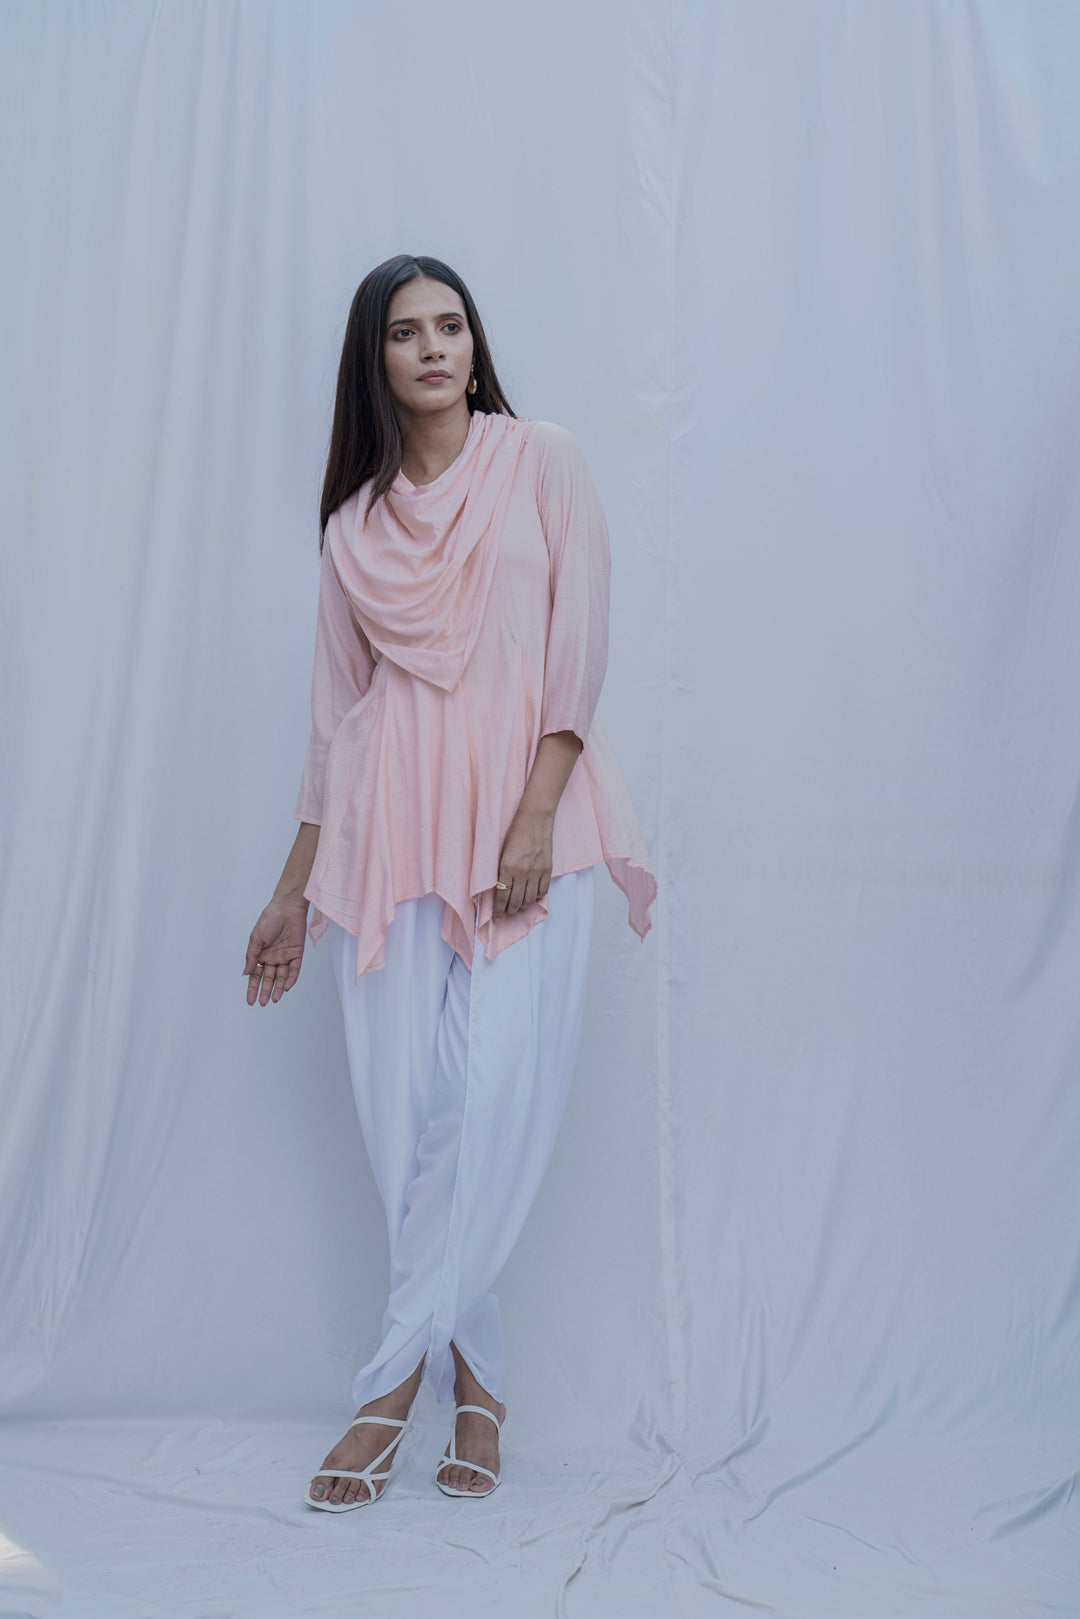 Dream Cowl Top in Peach and Tulip Dhoti in White - Set